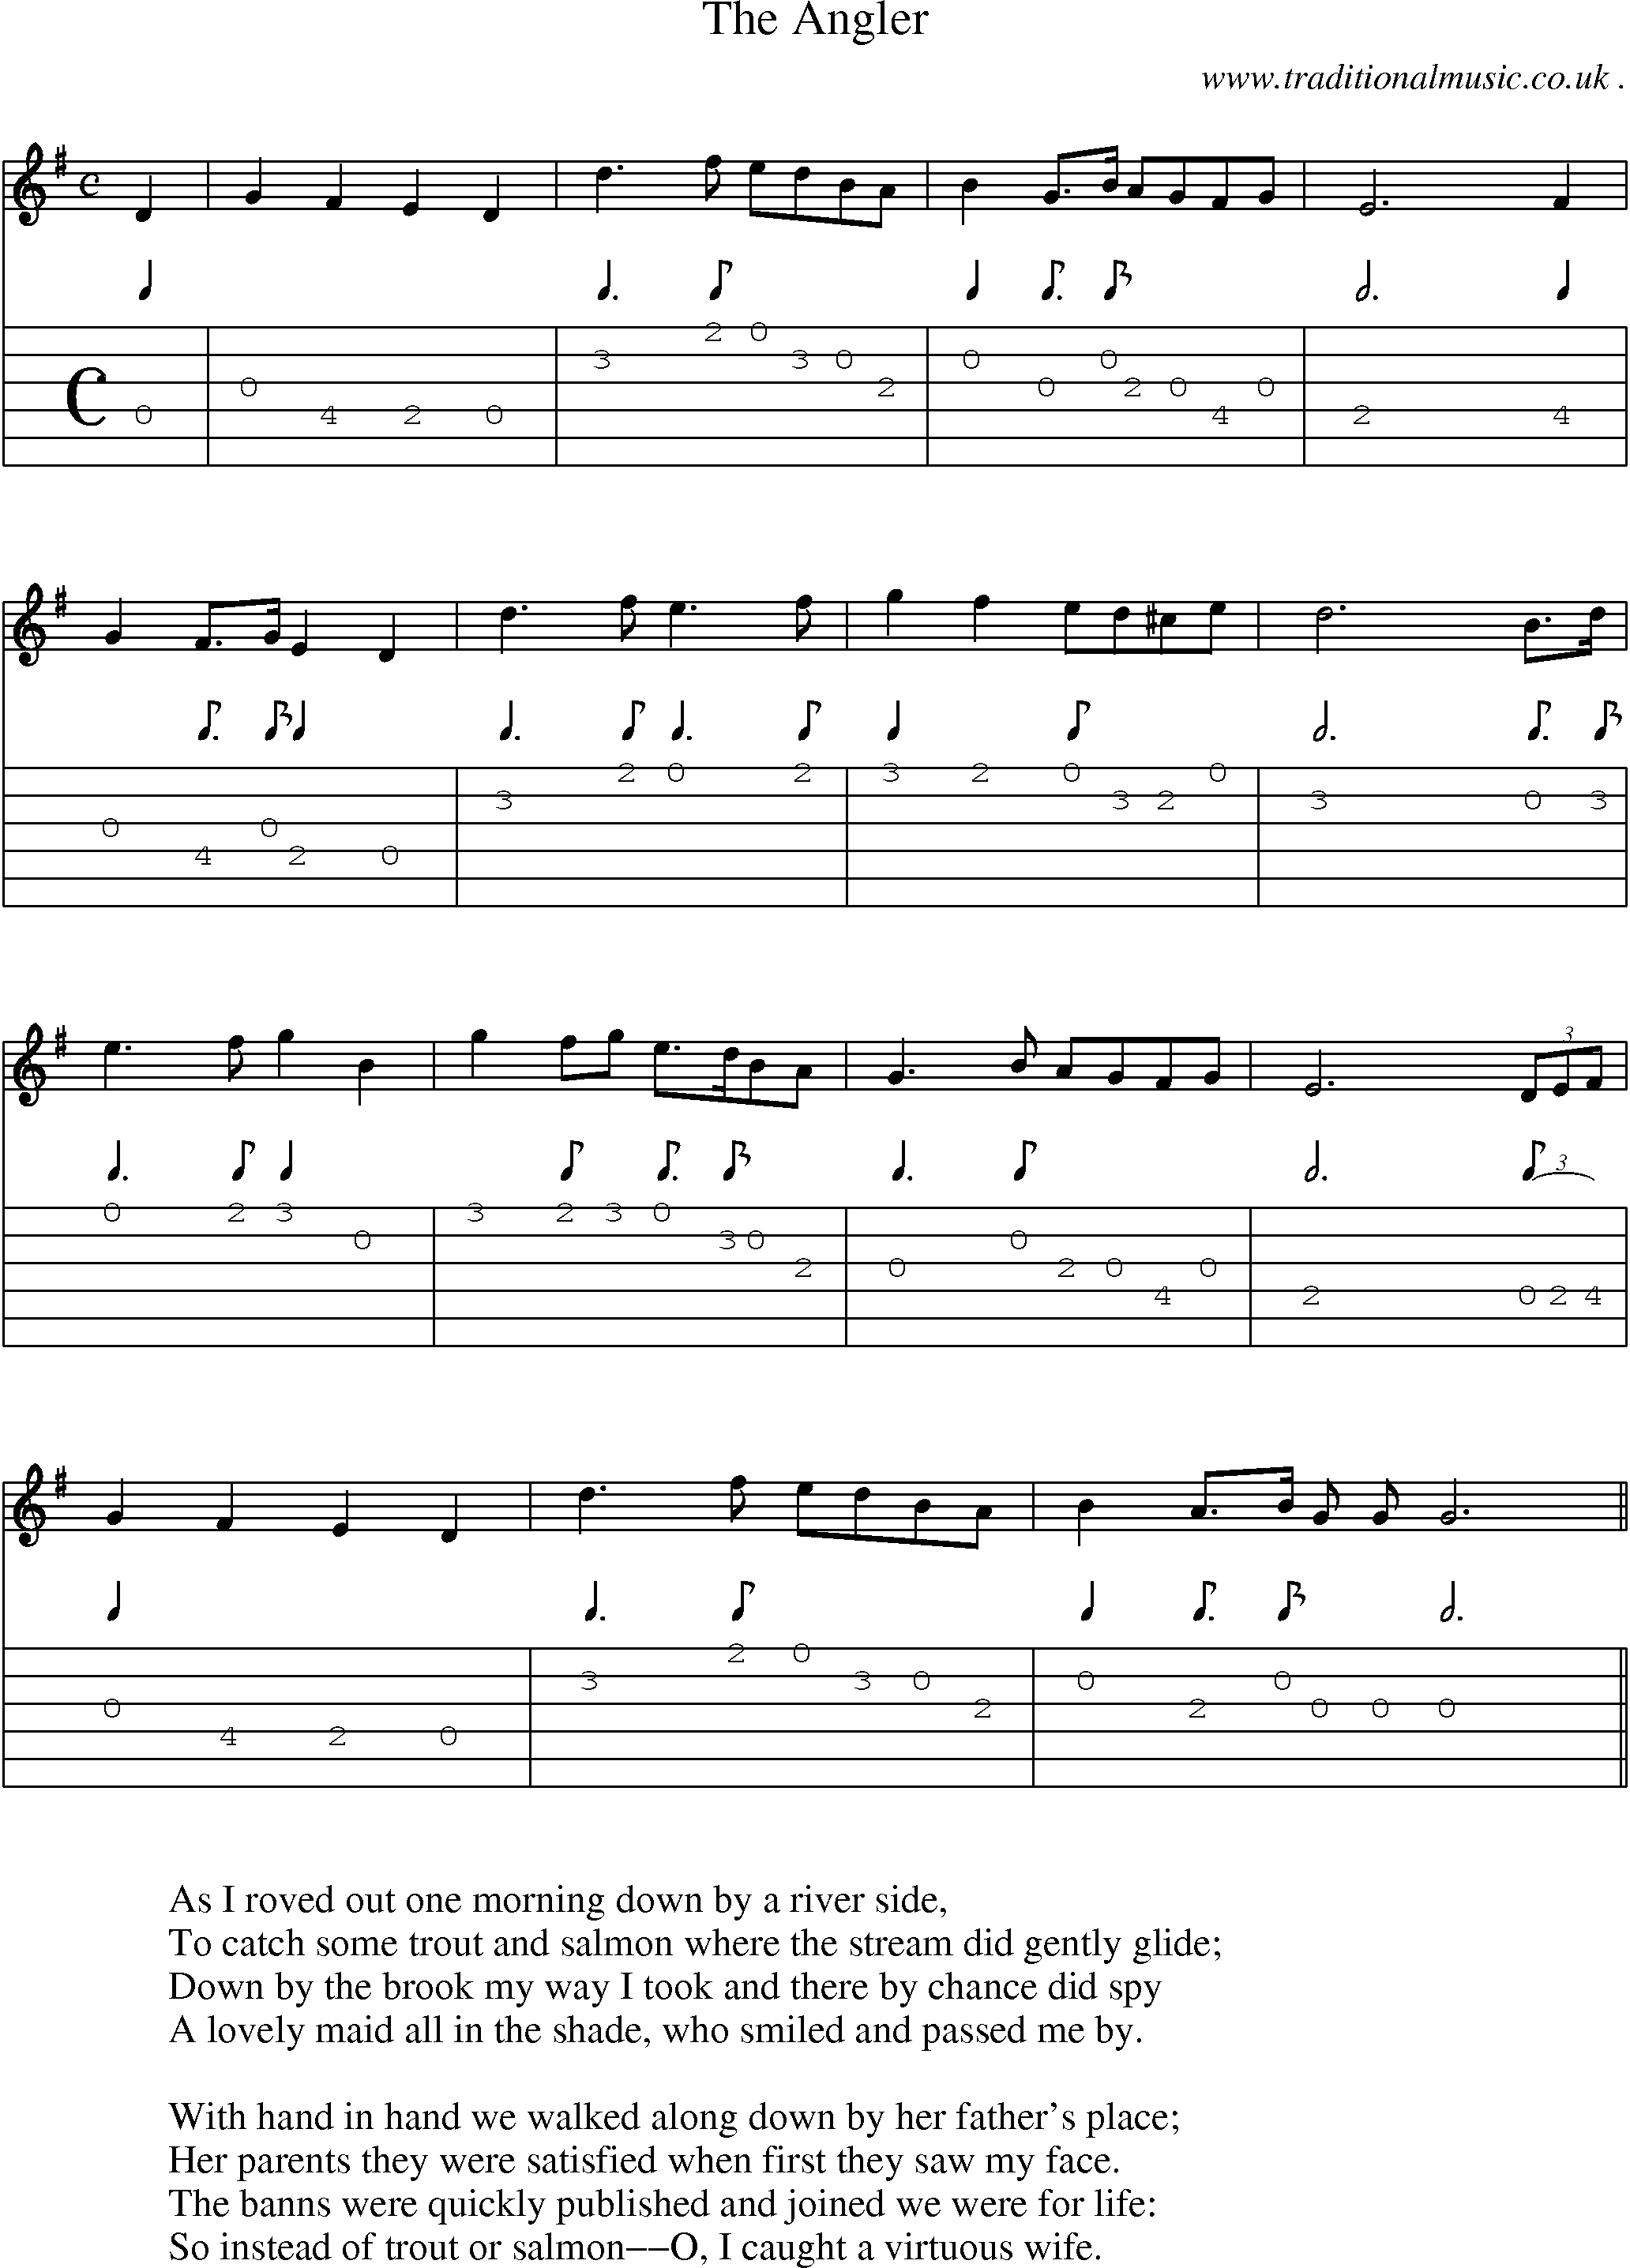 Sheet-Music and Guitar Tabs for The Angler